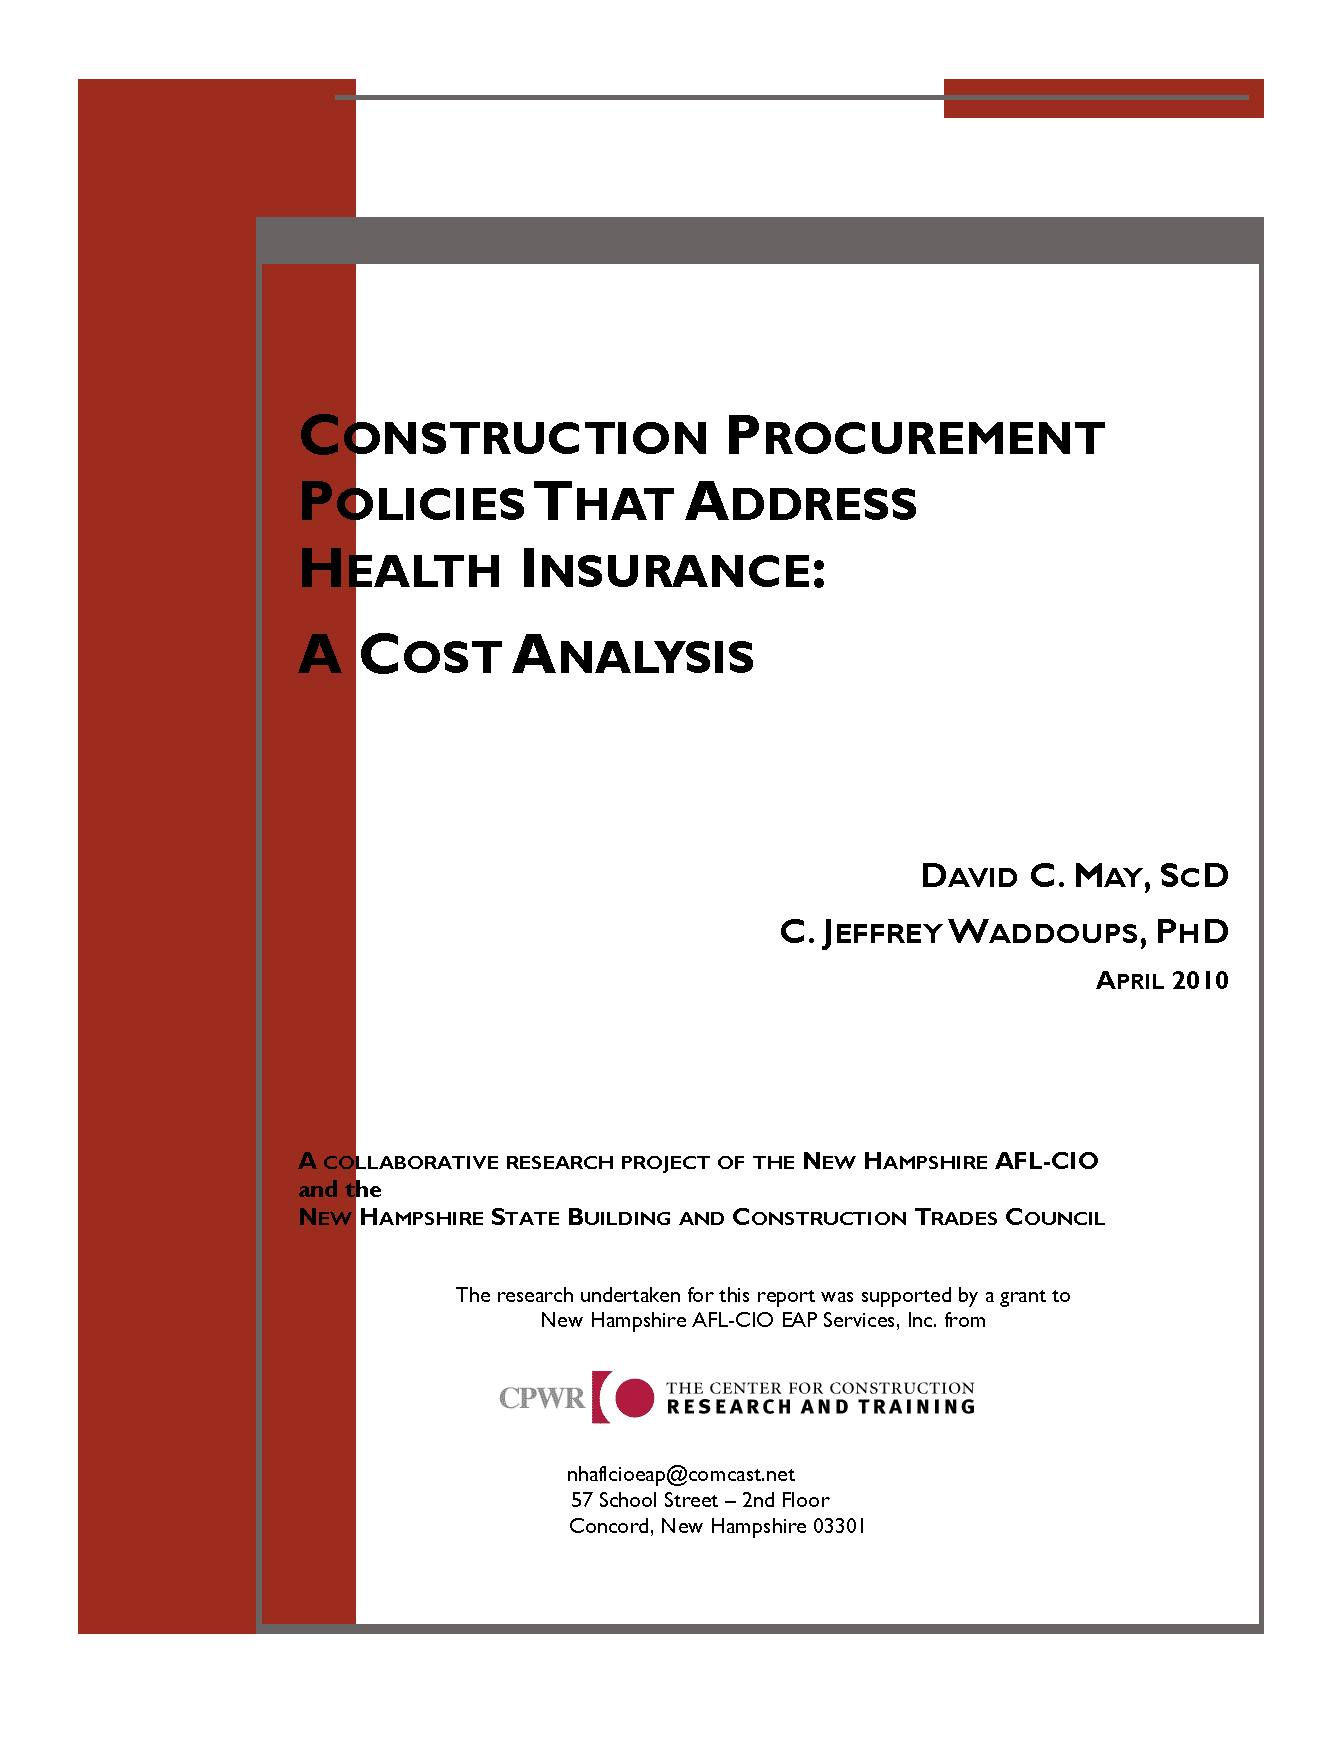 construction_procurement_policies_that_address_health_insurance_final_red_cover_page_01